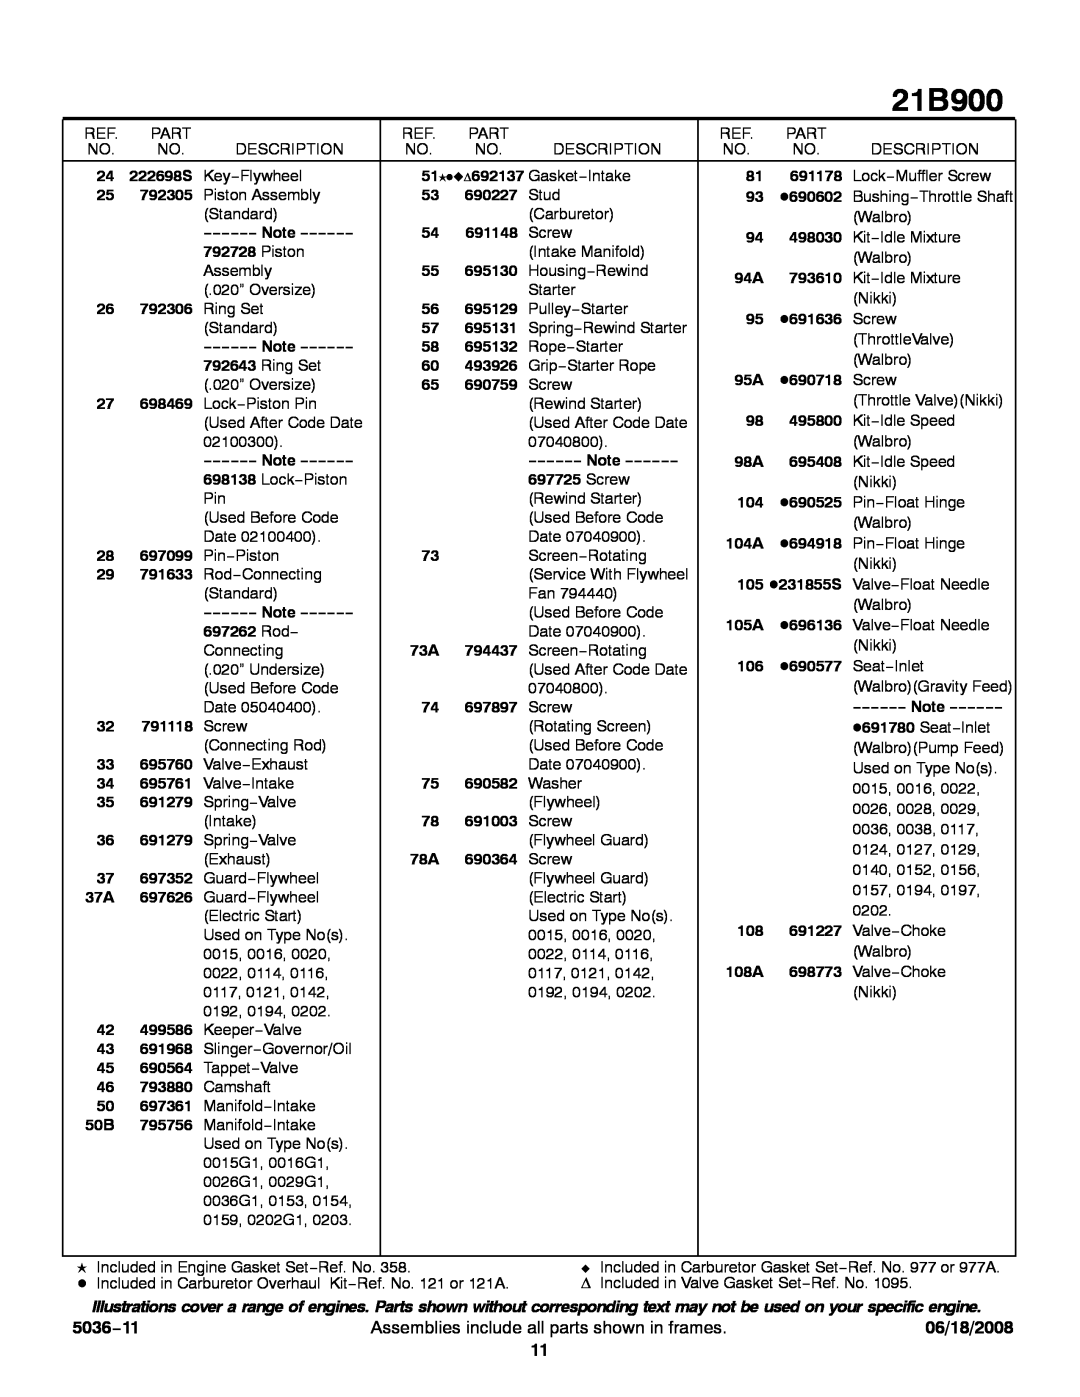 Briggs & Stratton 21B900 service manual 5036−11, Assemblies include all parts shown in frames, 06/18/2008 